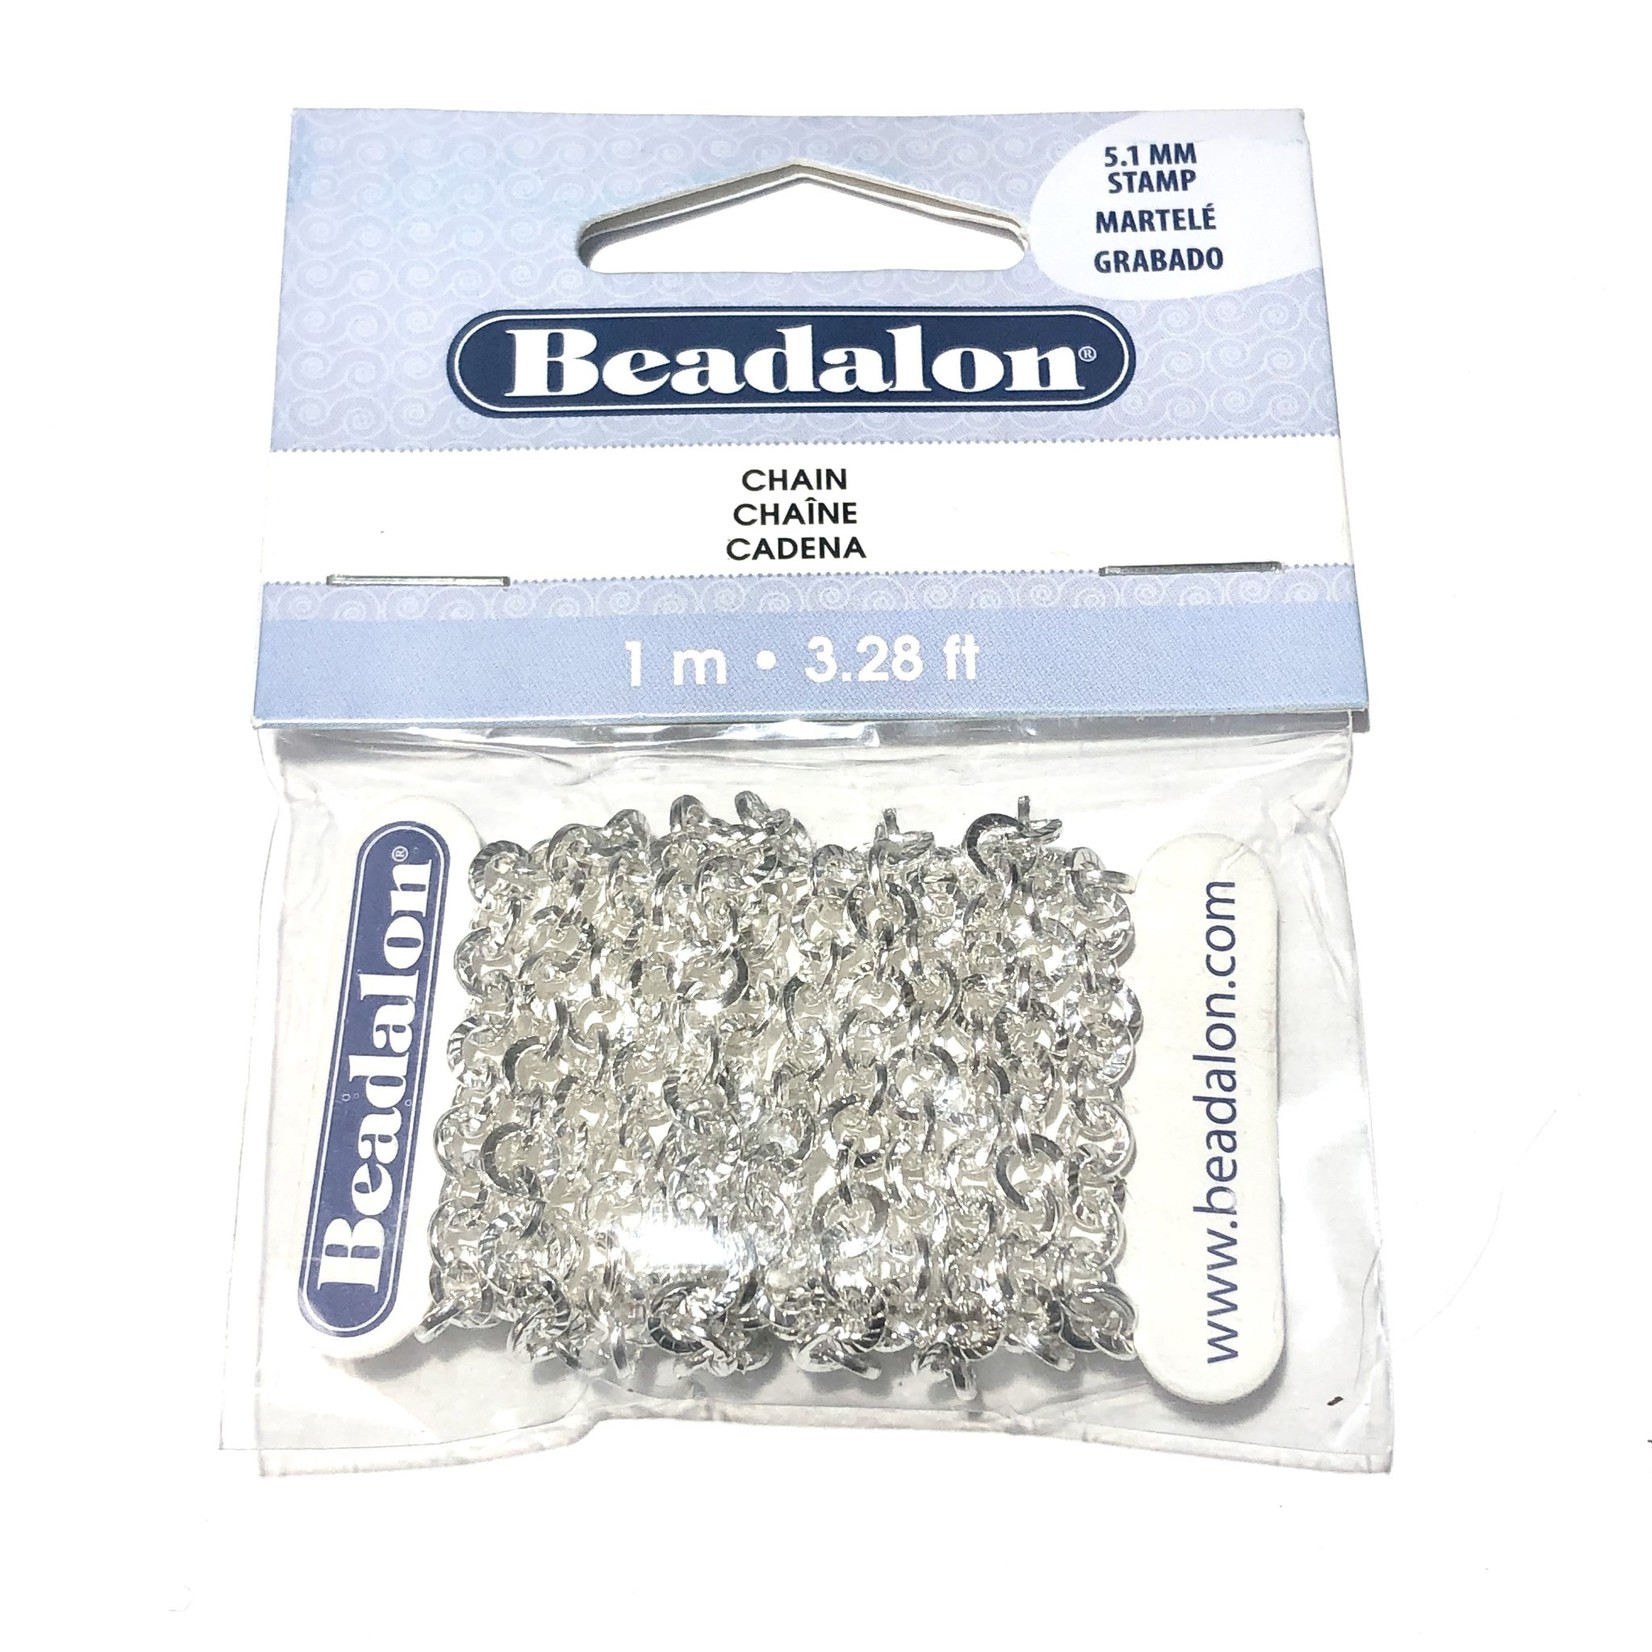 Beadalon Stamped Chain 5.1mm Silver Plated 1m